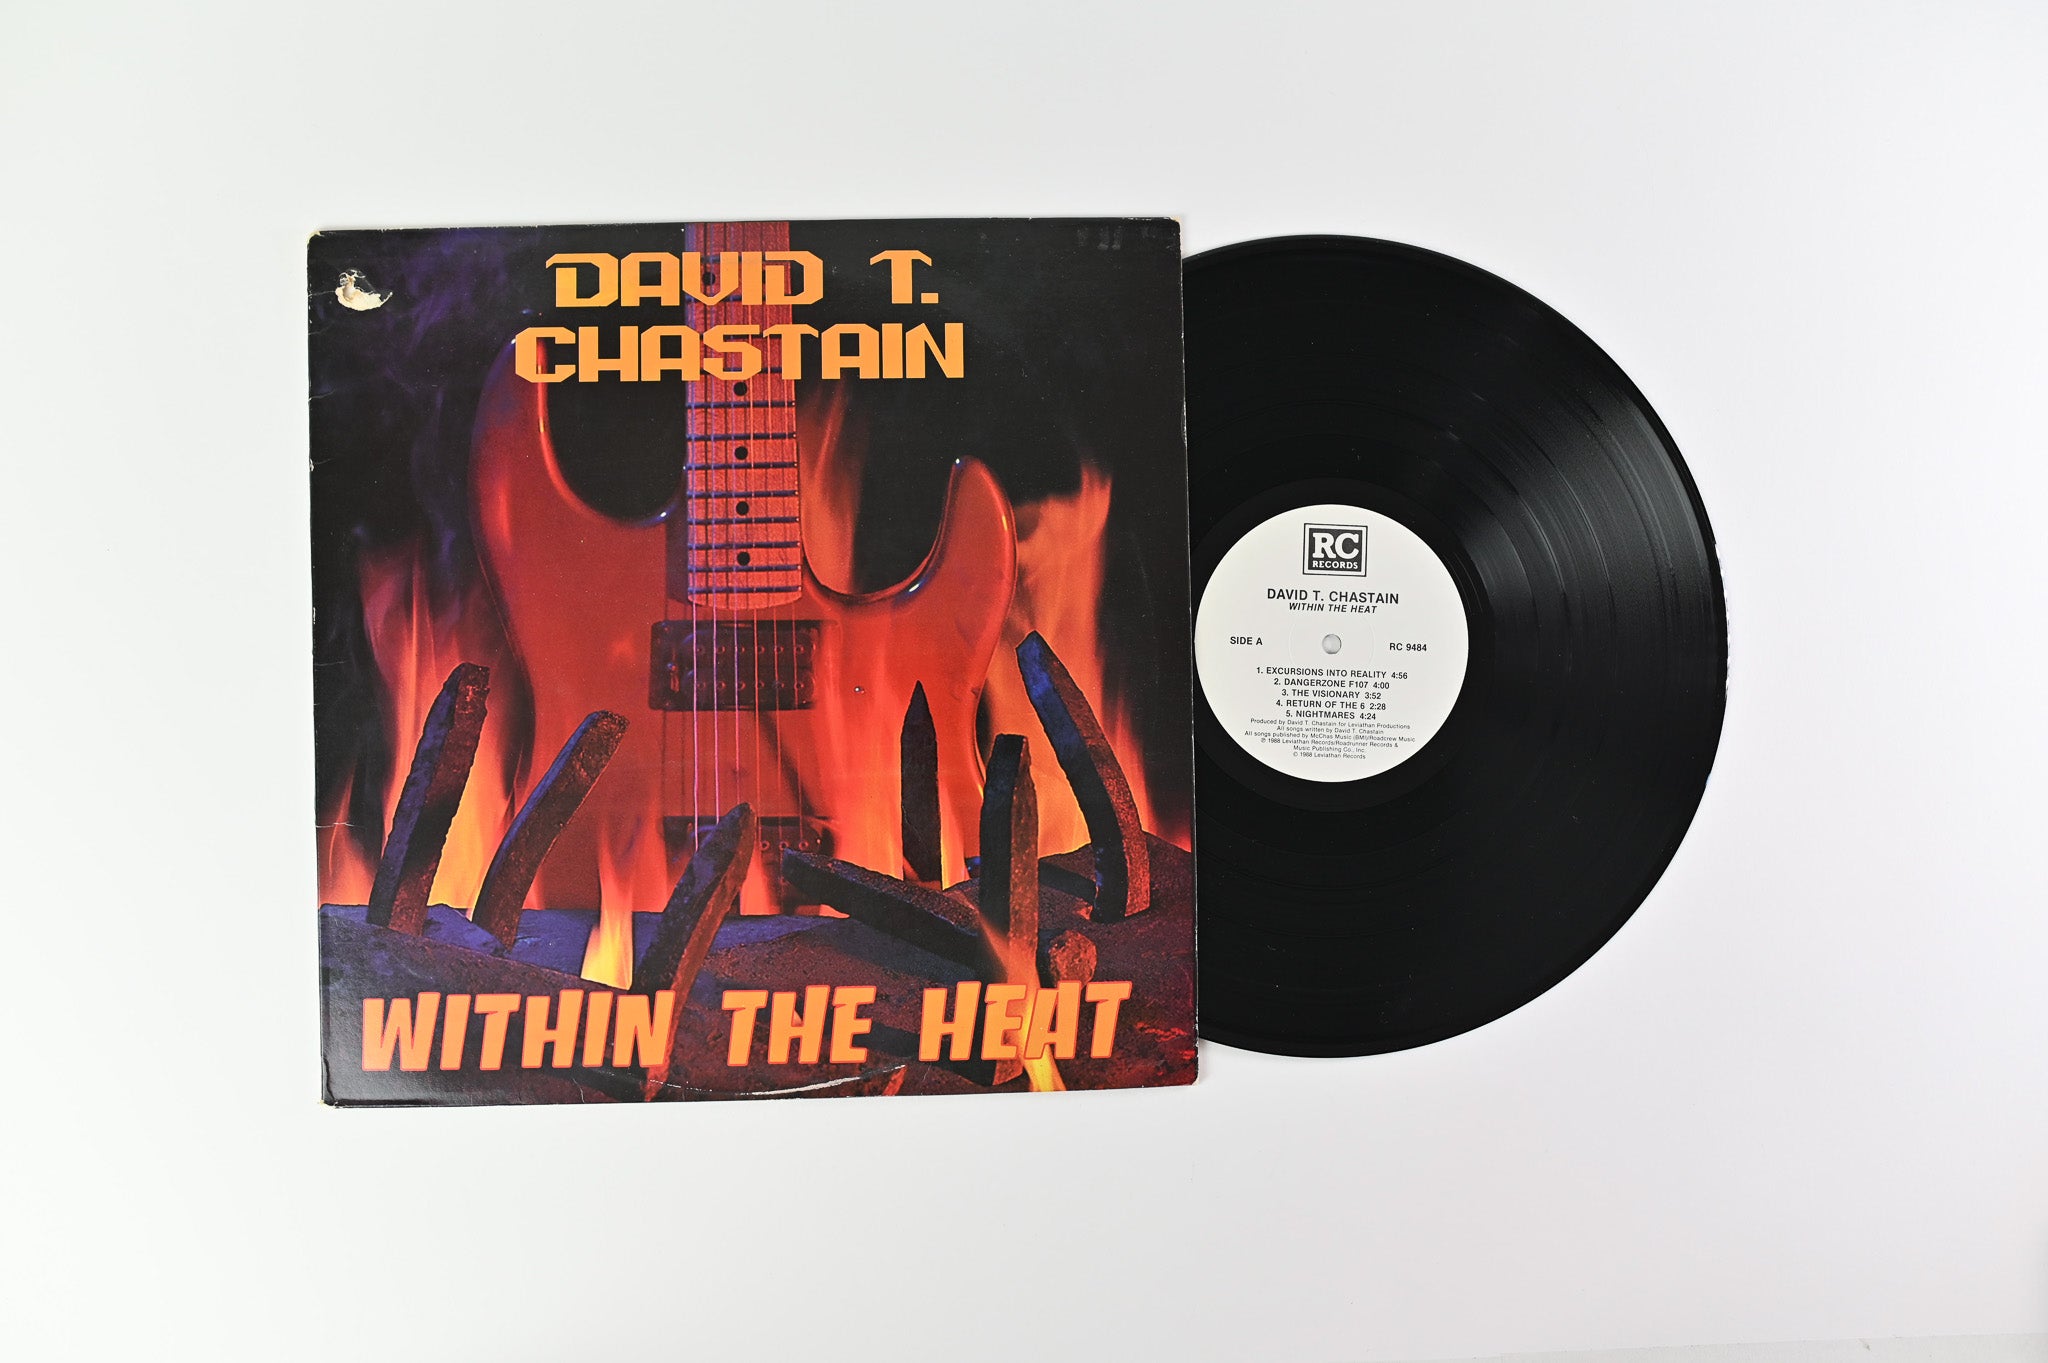 David T. Chastain - Within The Heat on R/C Records